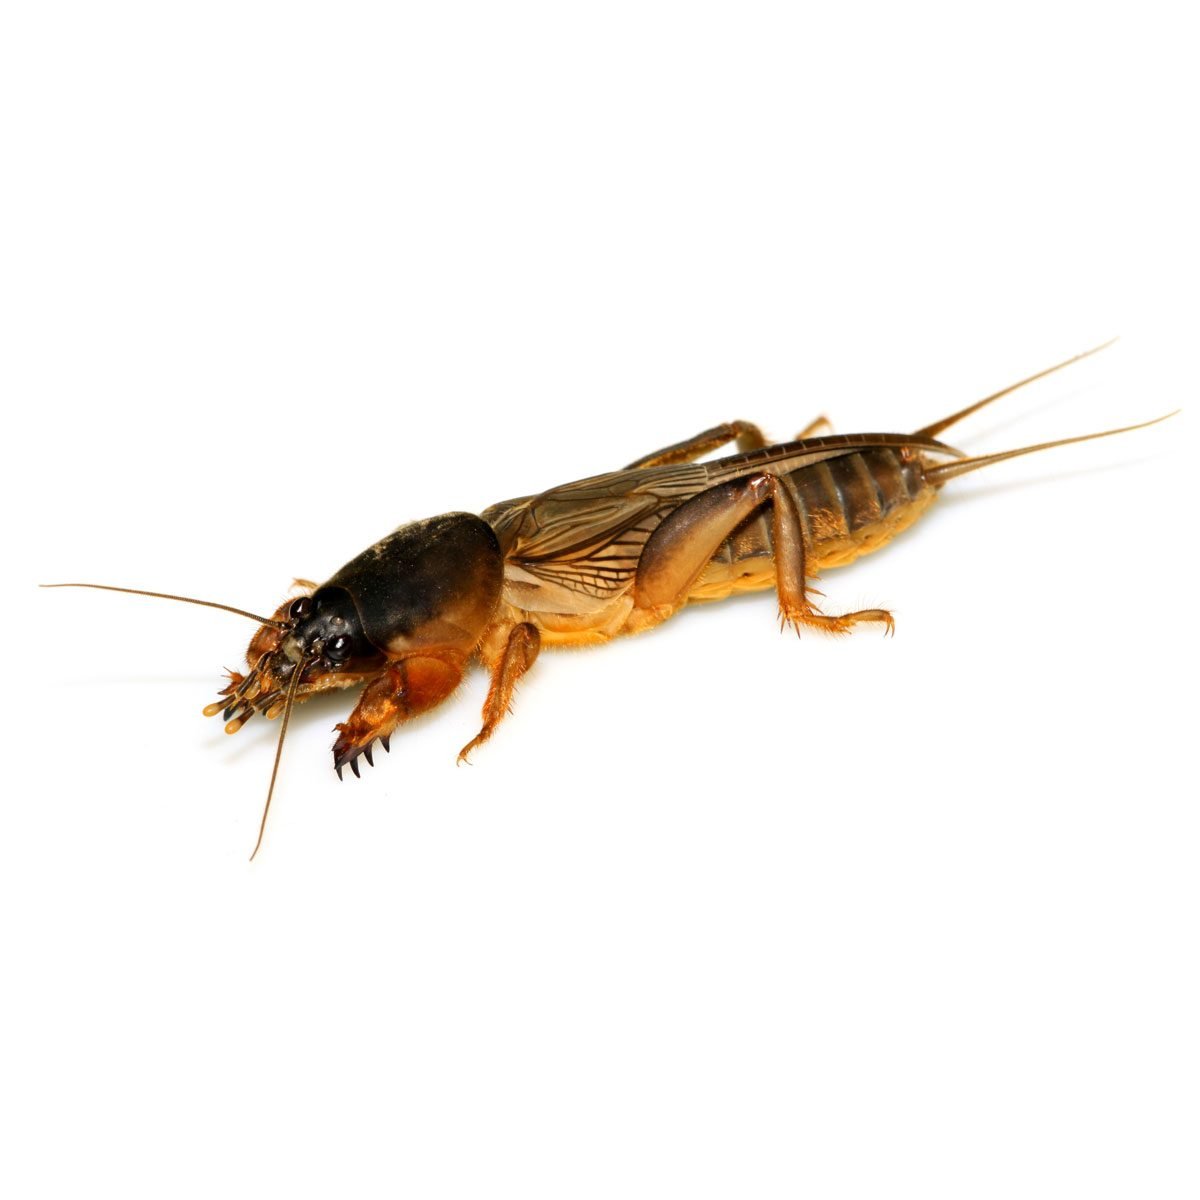 How to Stop Mole Crickets From Damaging Your Lawn